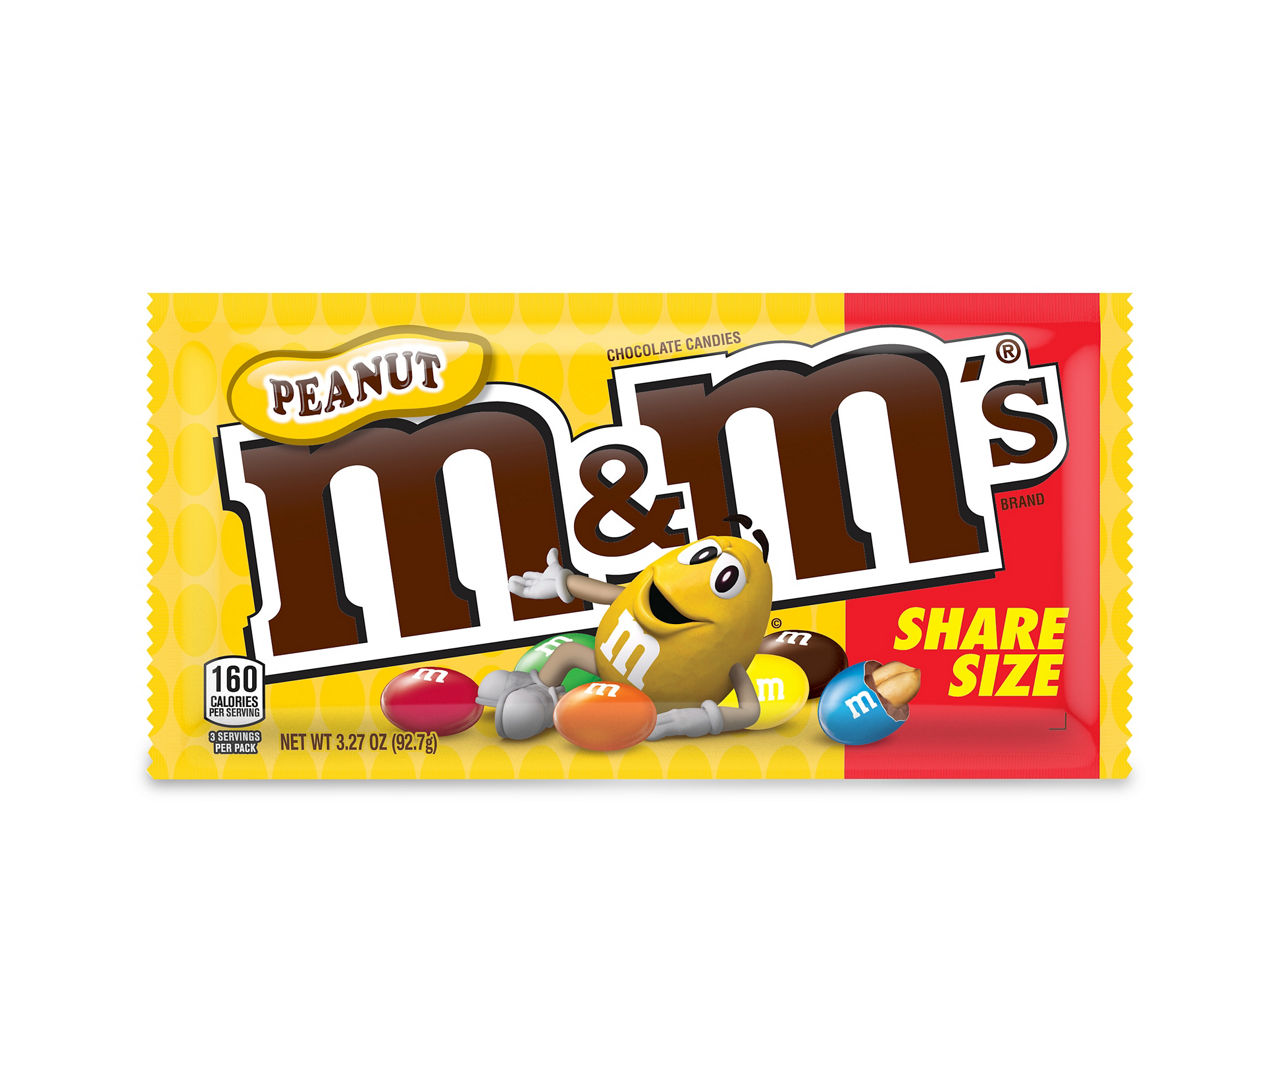 M&M'S M&M PEANUT SWEET CANDY BLUE BAG WITH BLUE FACE